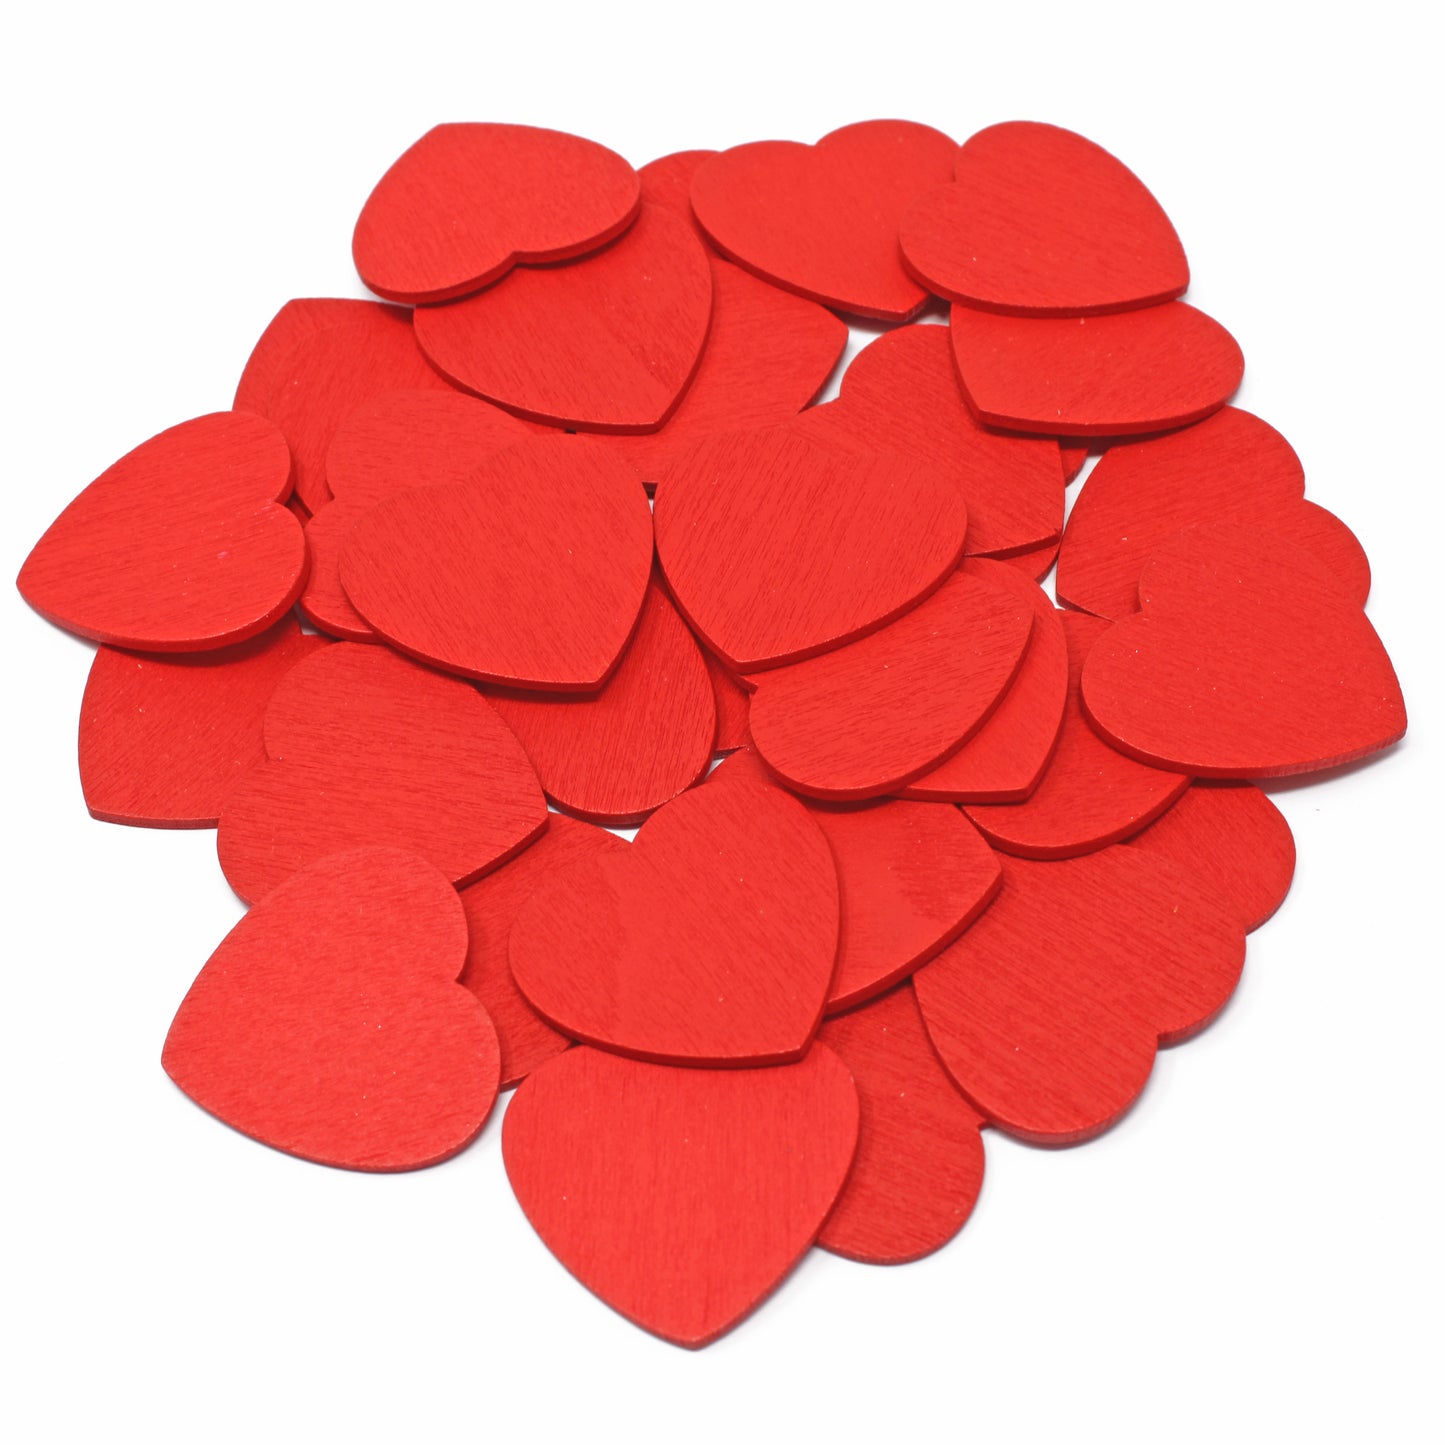 Red 28mm Wooden Craft Coloured Hearts